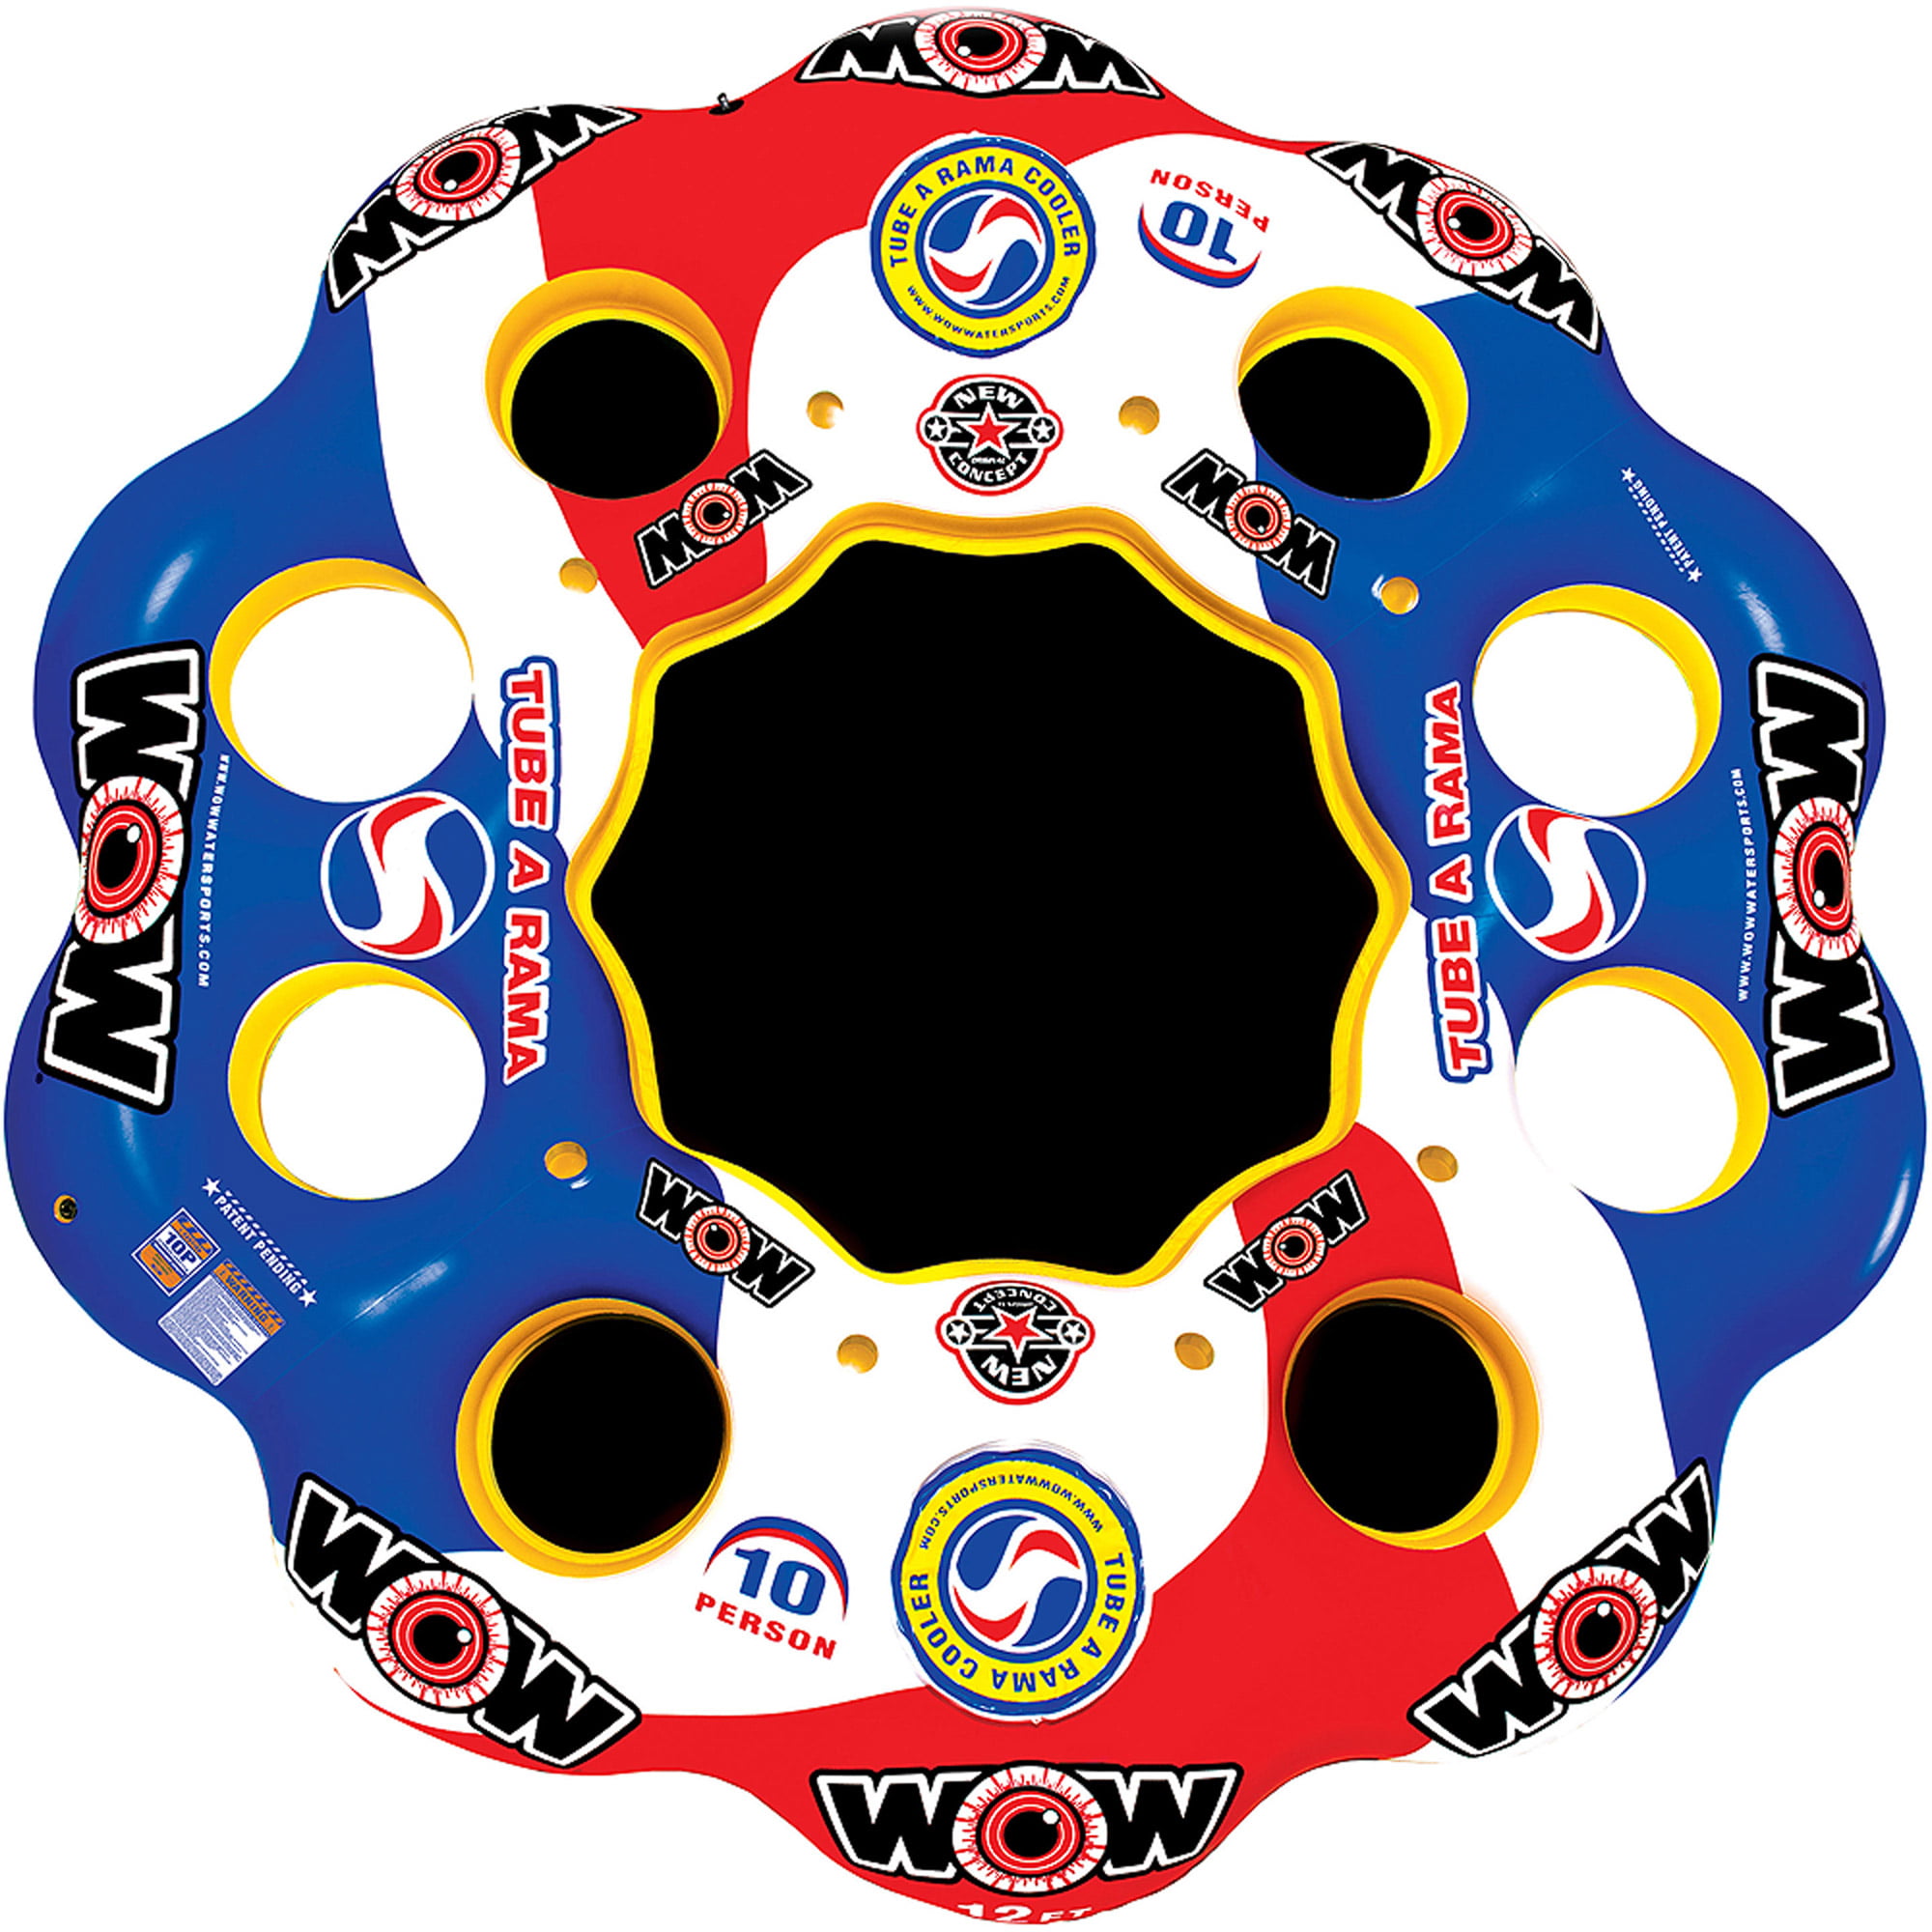 WOW World of Watersports, 13-2060 Tube A Rama, 10 Person Inflatable  Floating Island, 12 Foot Diameter